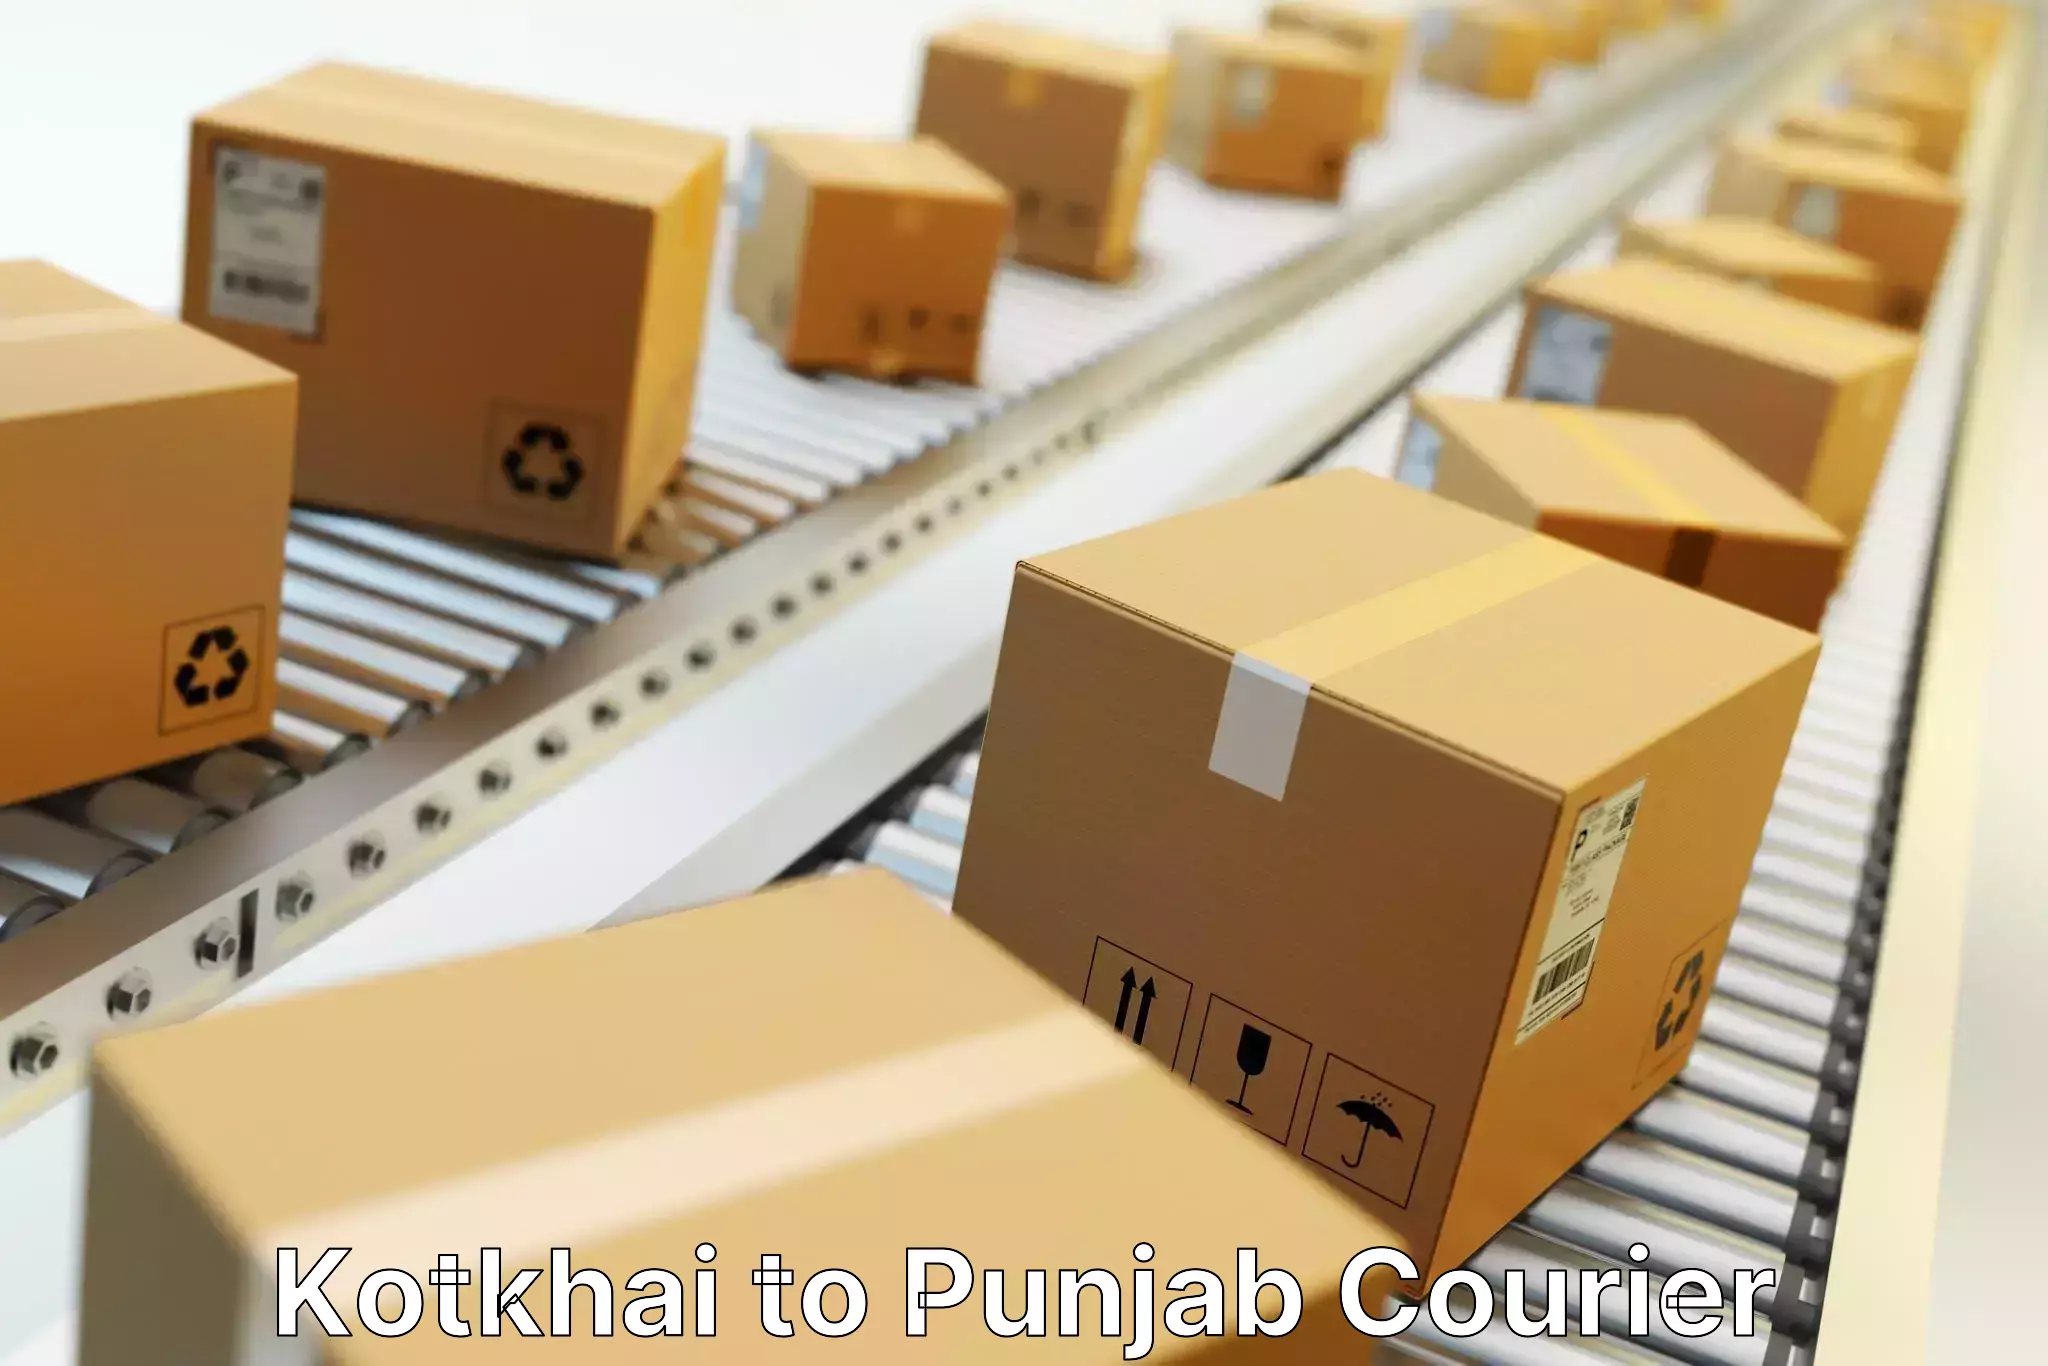 Affordable shipping rates Kotkhai to Sirhind Fatehgarh